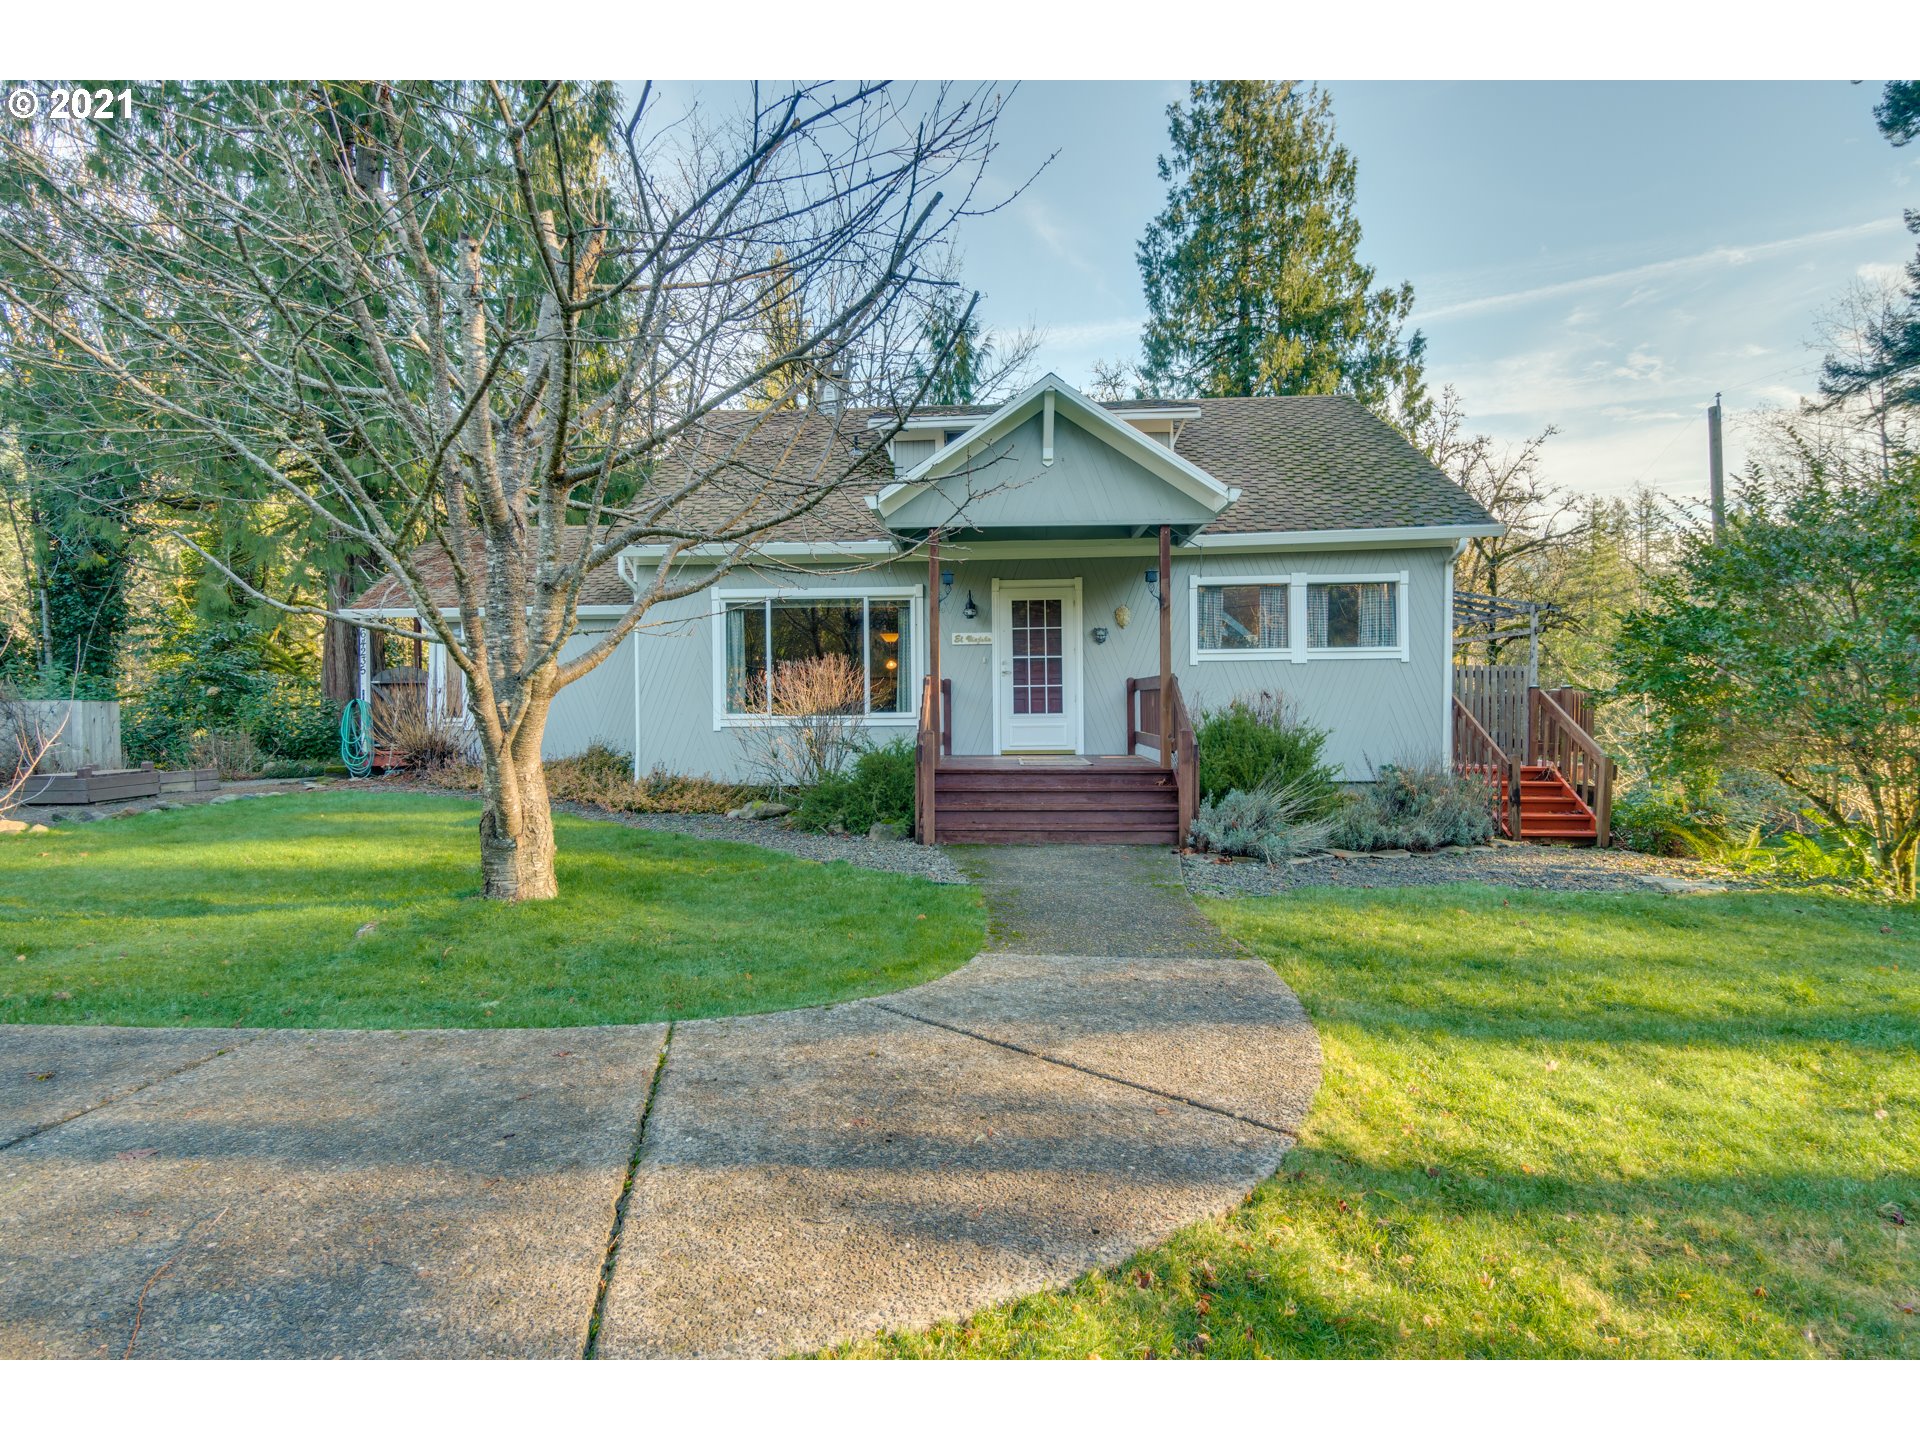 64235 E BRIGHTWOOD LOOP RD (1 of 30)